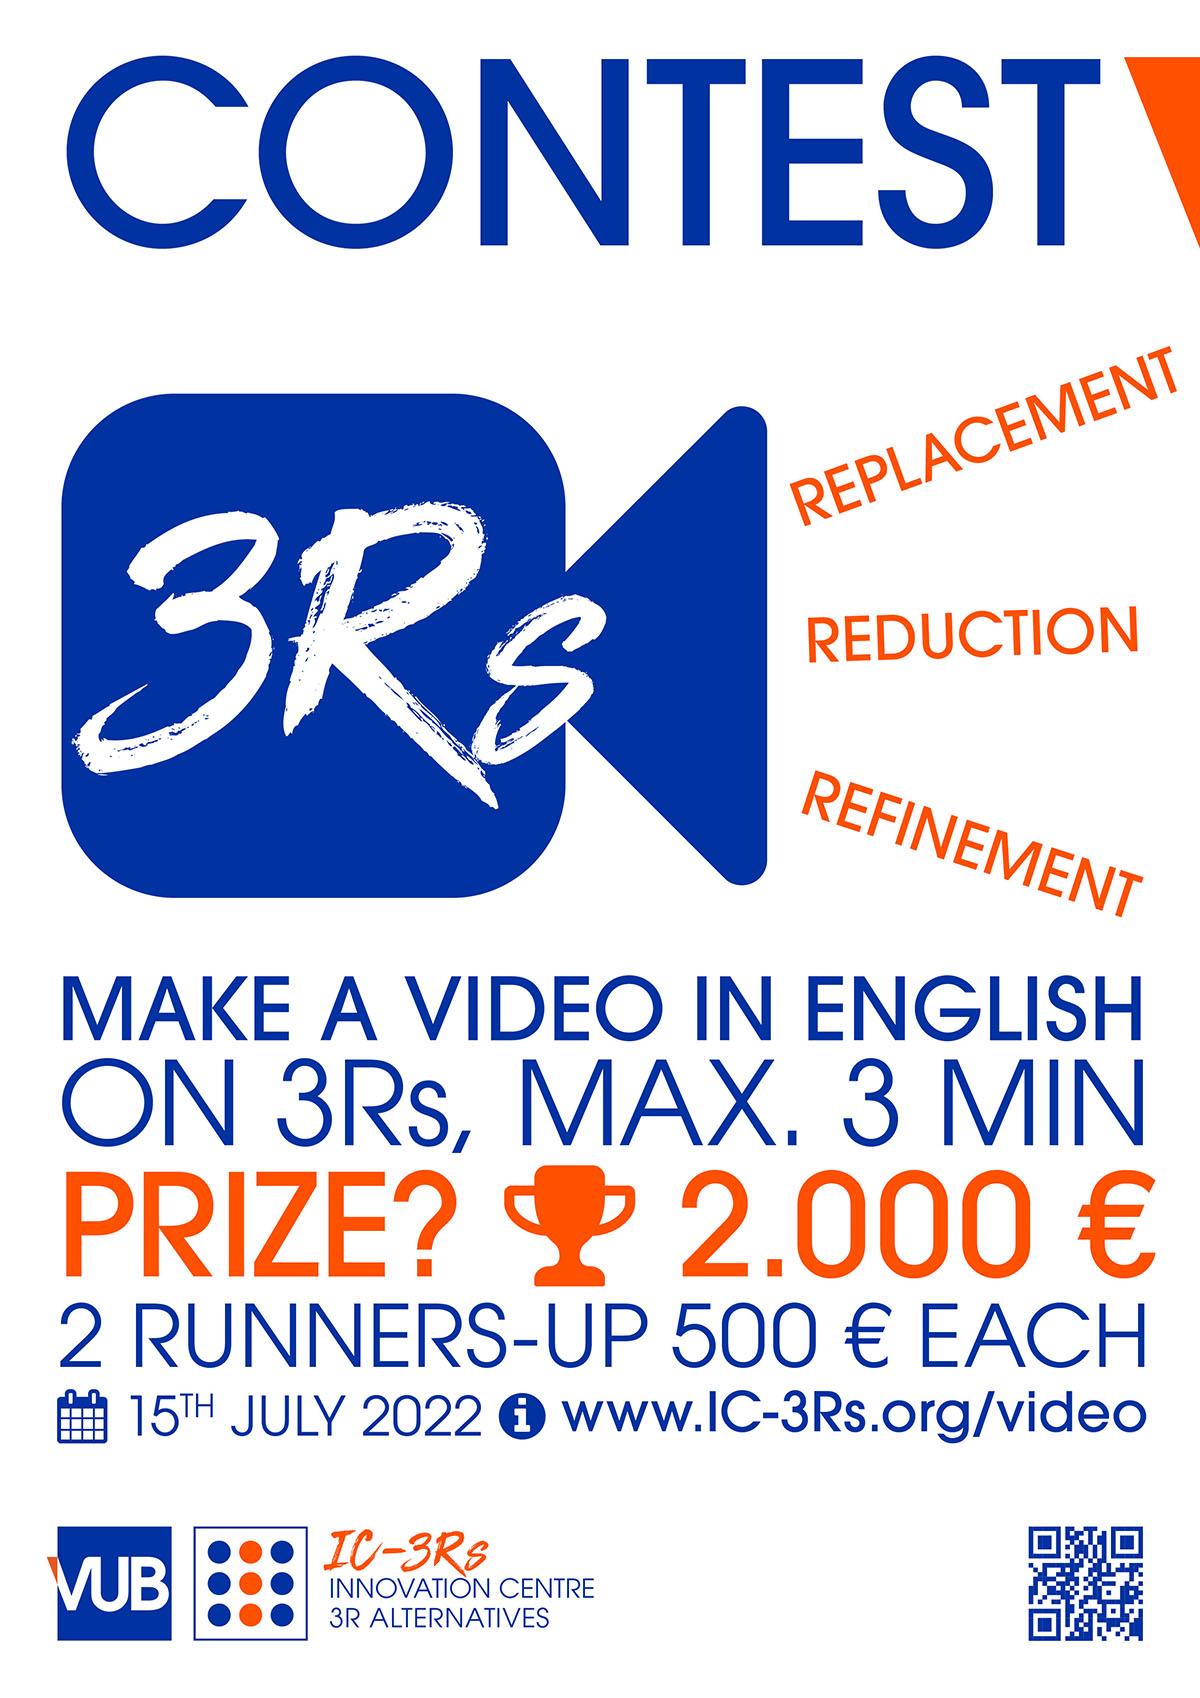 The Innovation Centre-3Rs (IC-3Rs) at the Vrije Universiteit Brussel (VUB) organizes a video contest that is open to all interested parties.